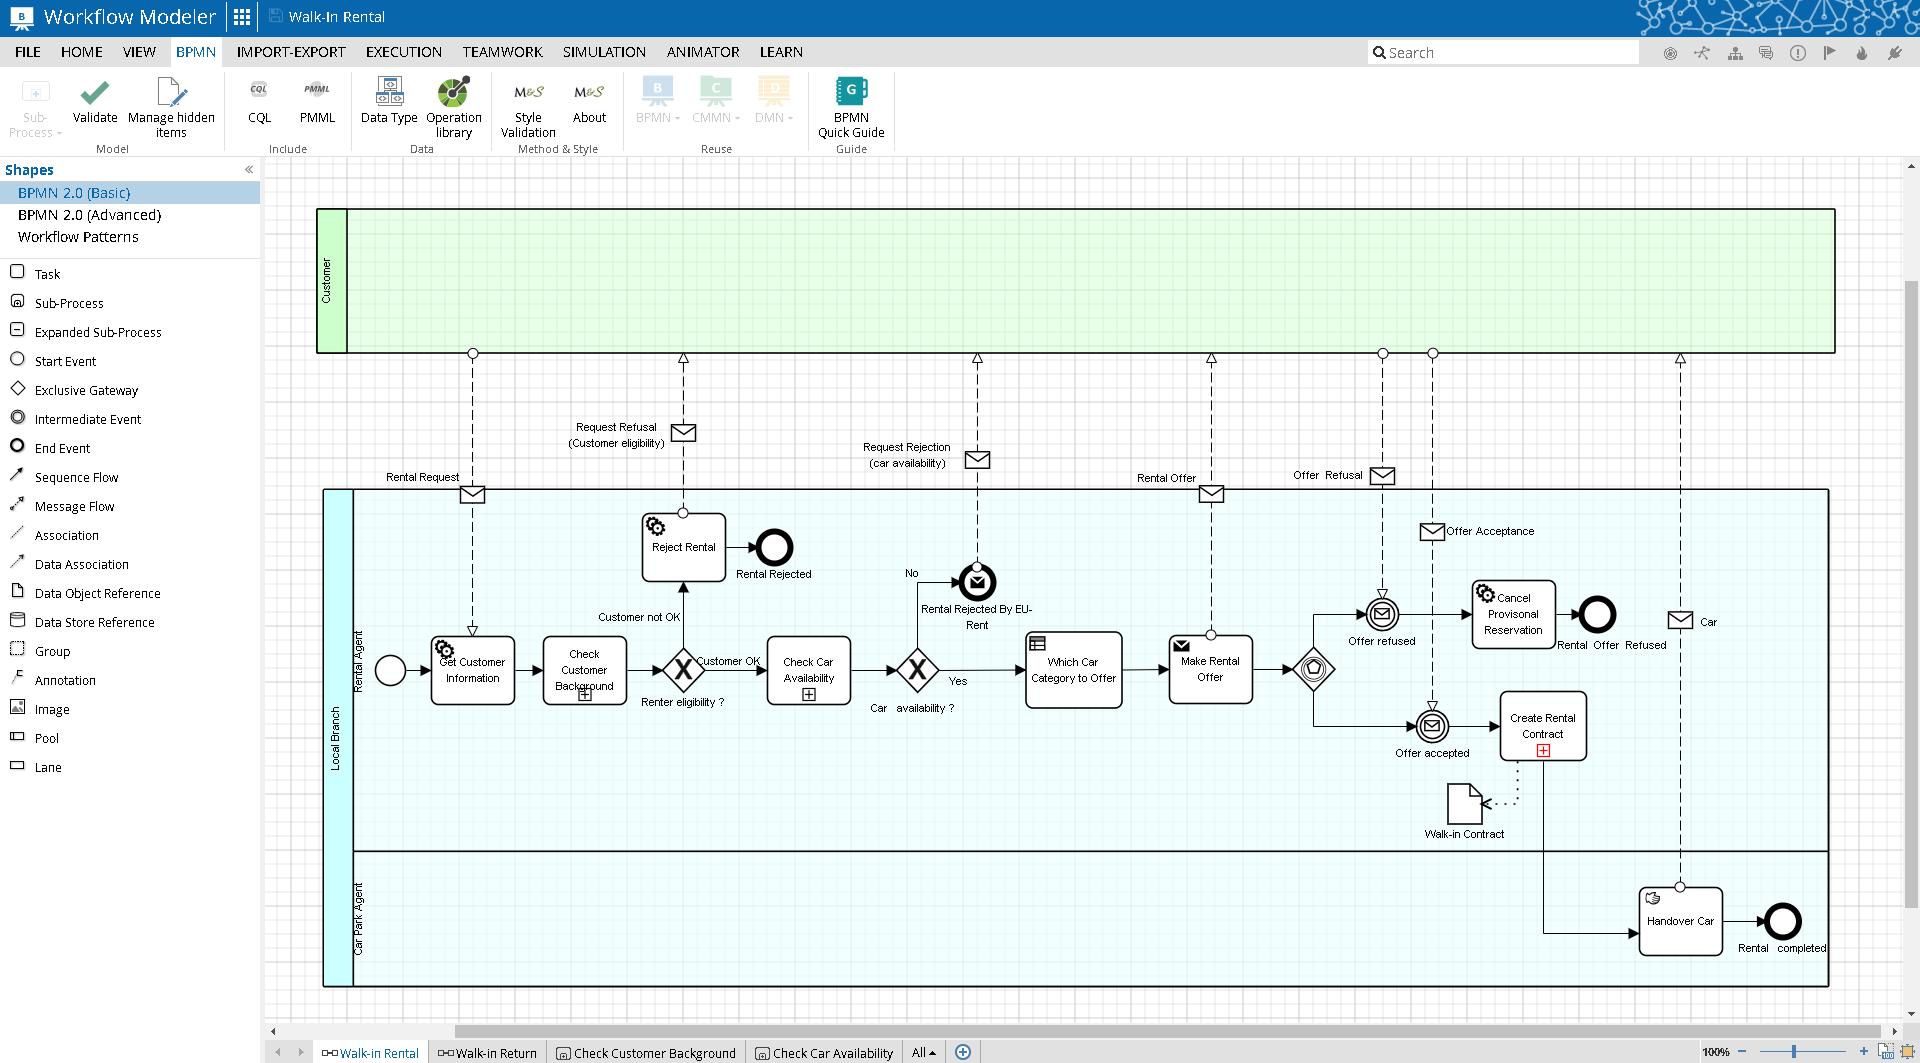 overview of the workflow modeler